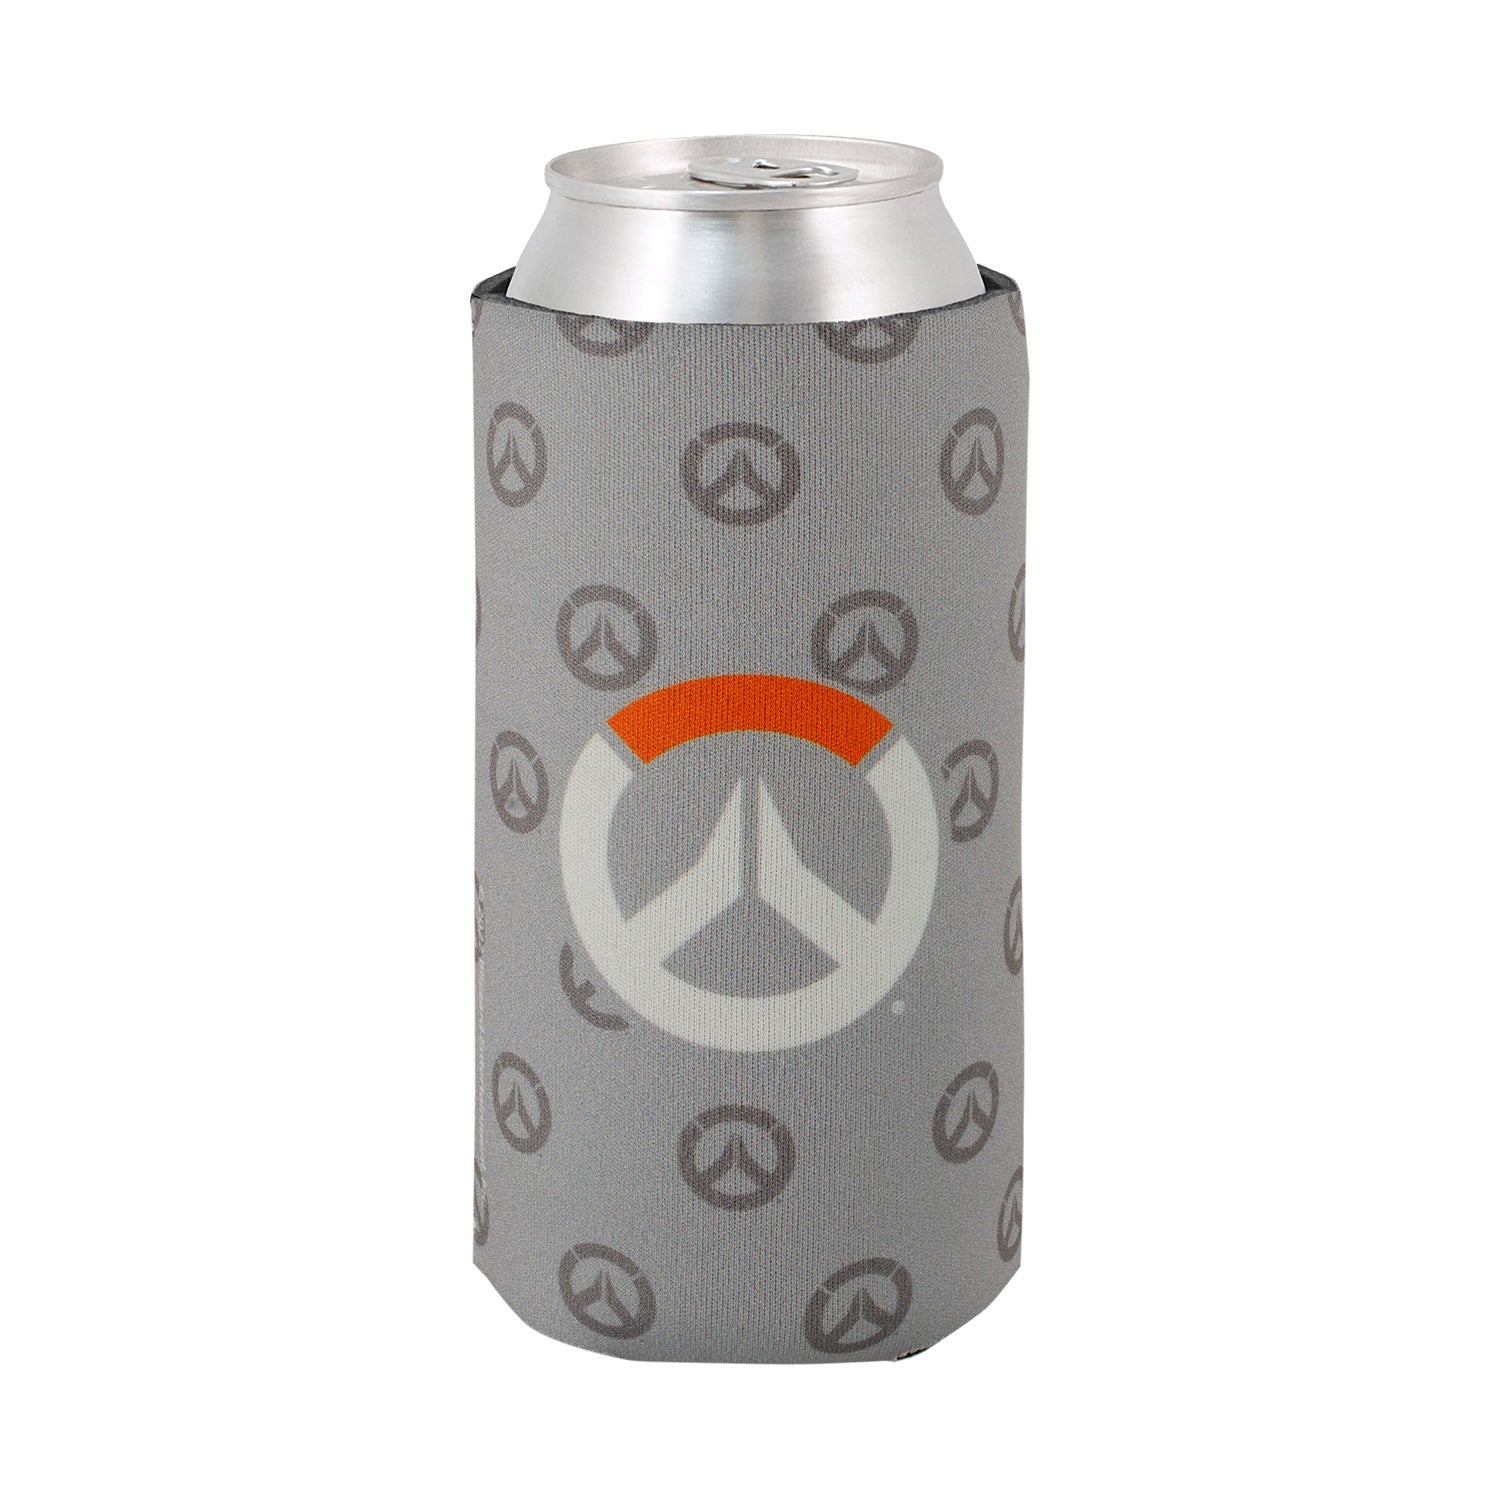 Overwatch 2 16oz Can Cooler - Back View